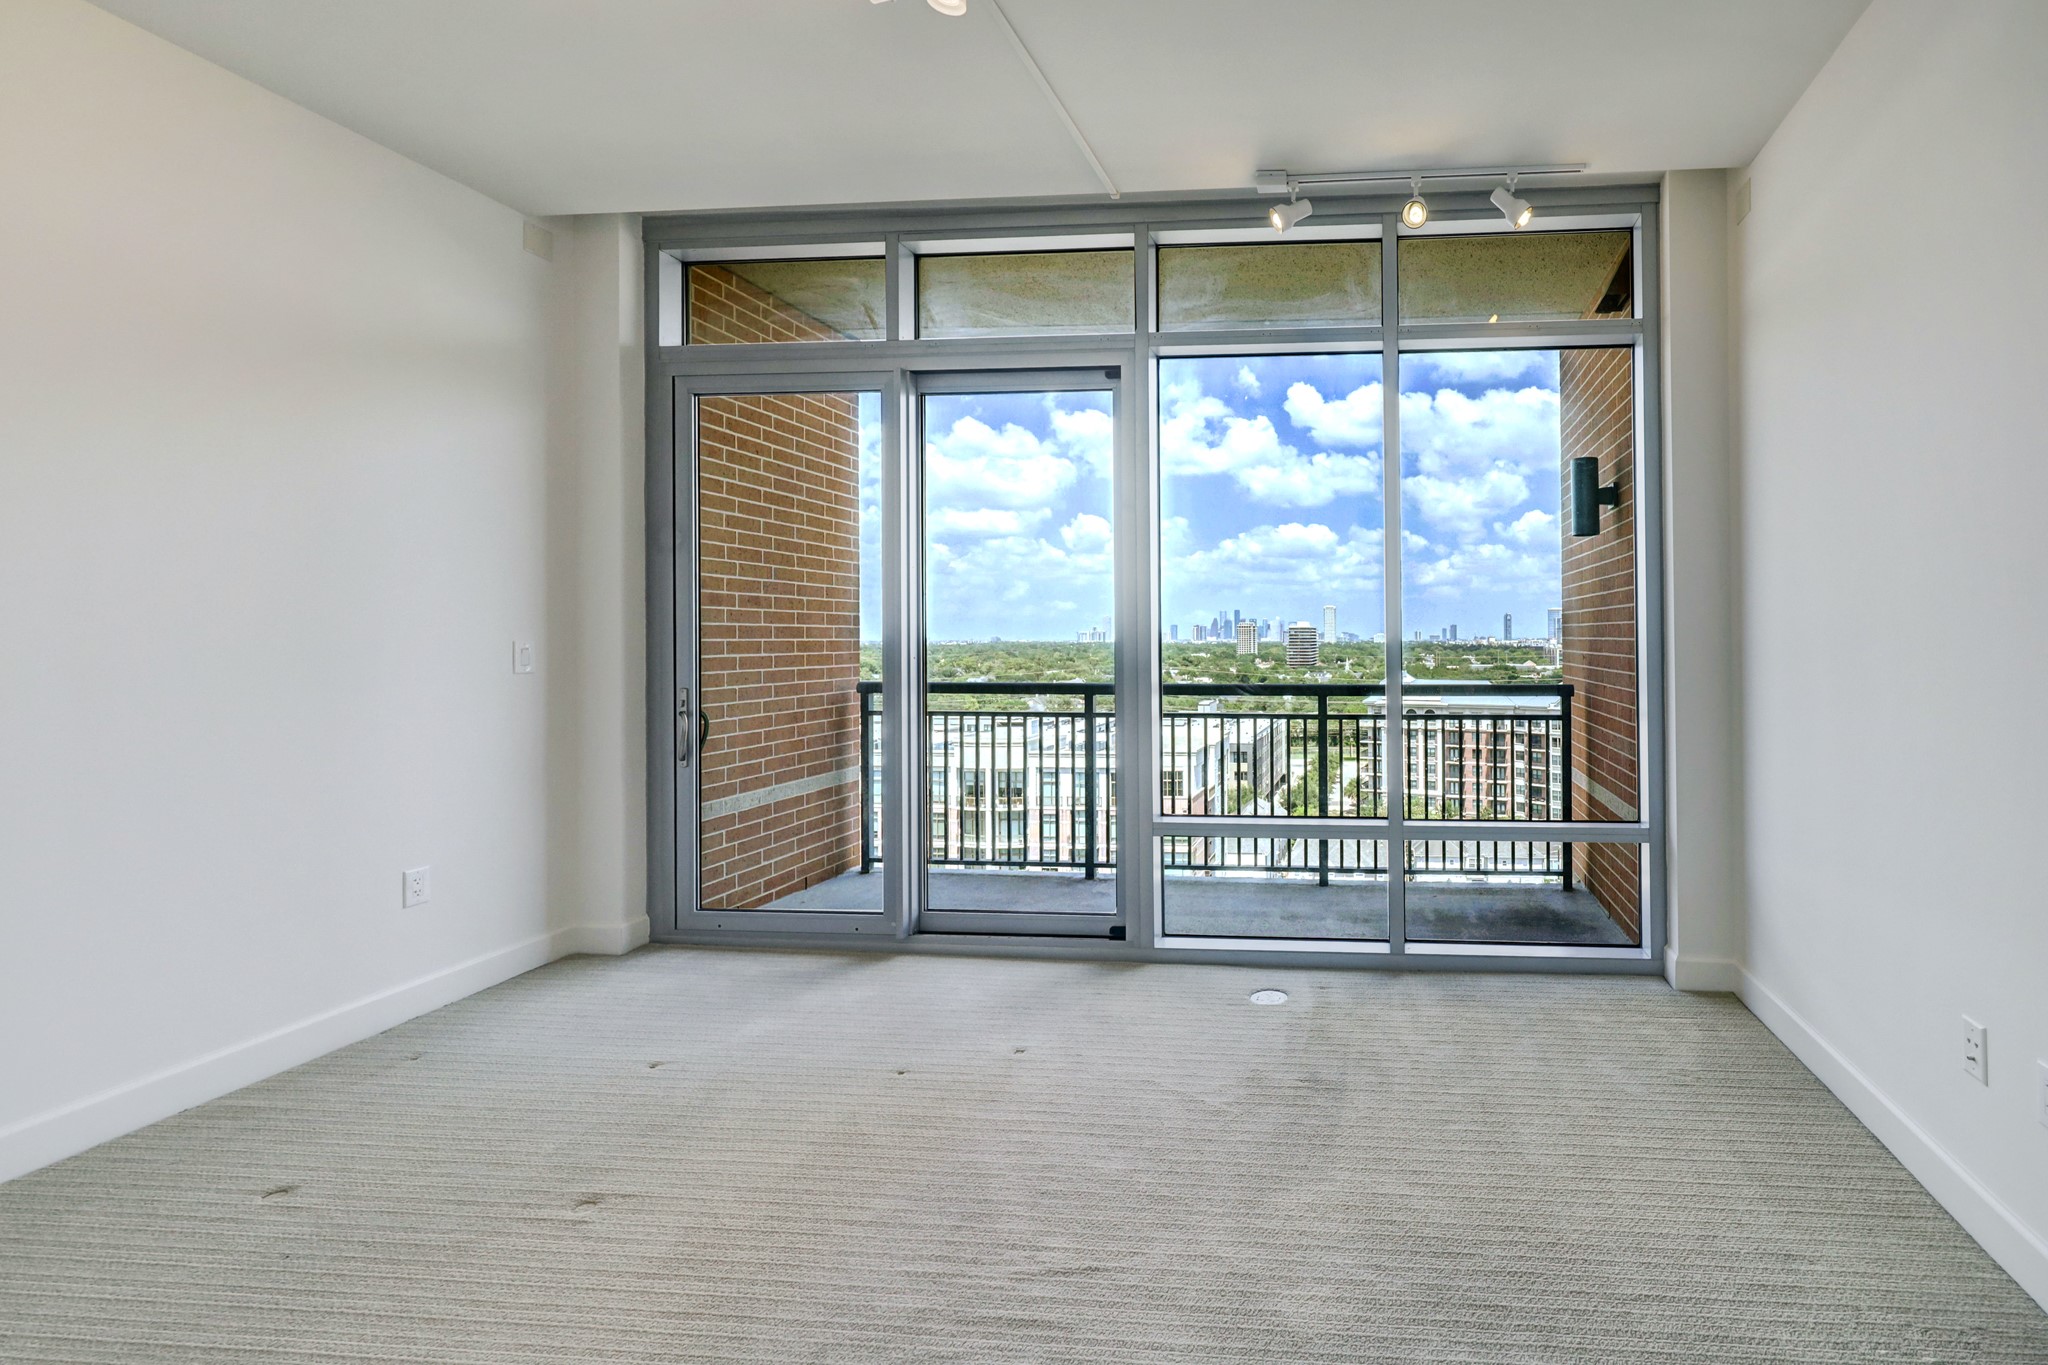 The second bedroom with ensuite bath enjoys the second balcony overlooking downtown Houston.